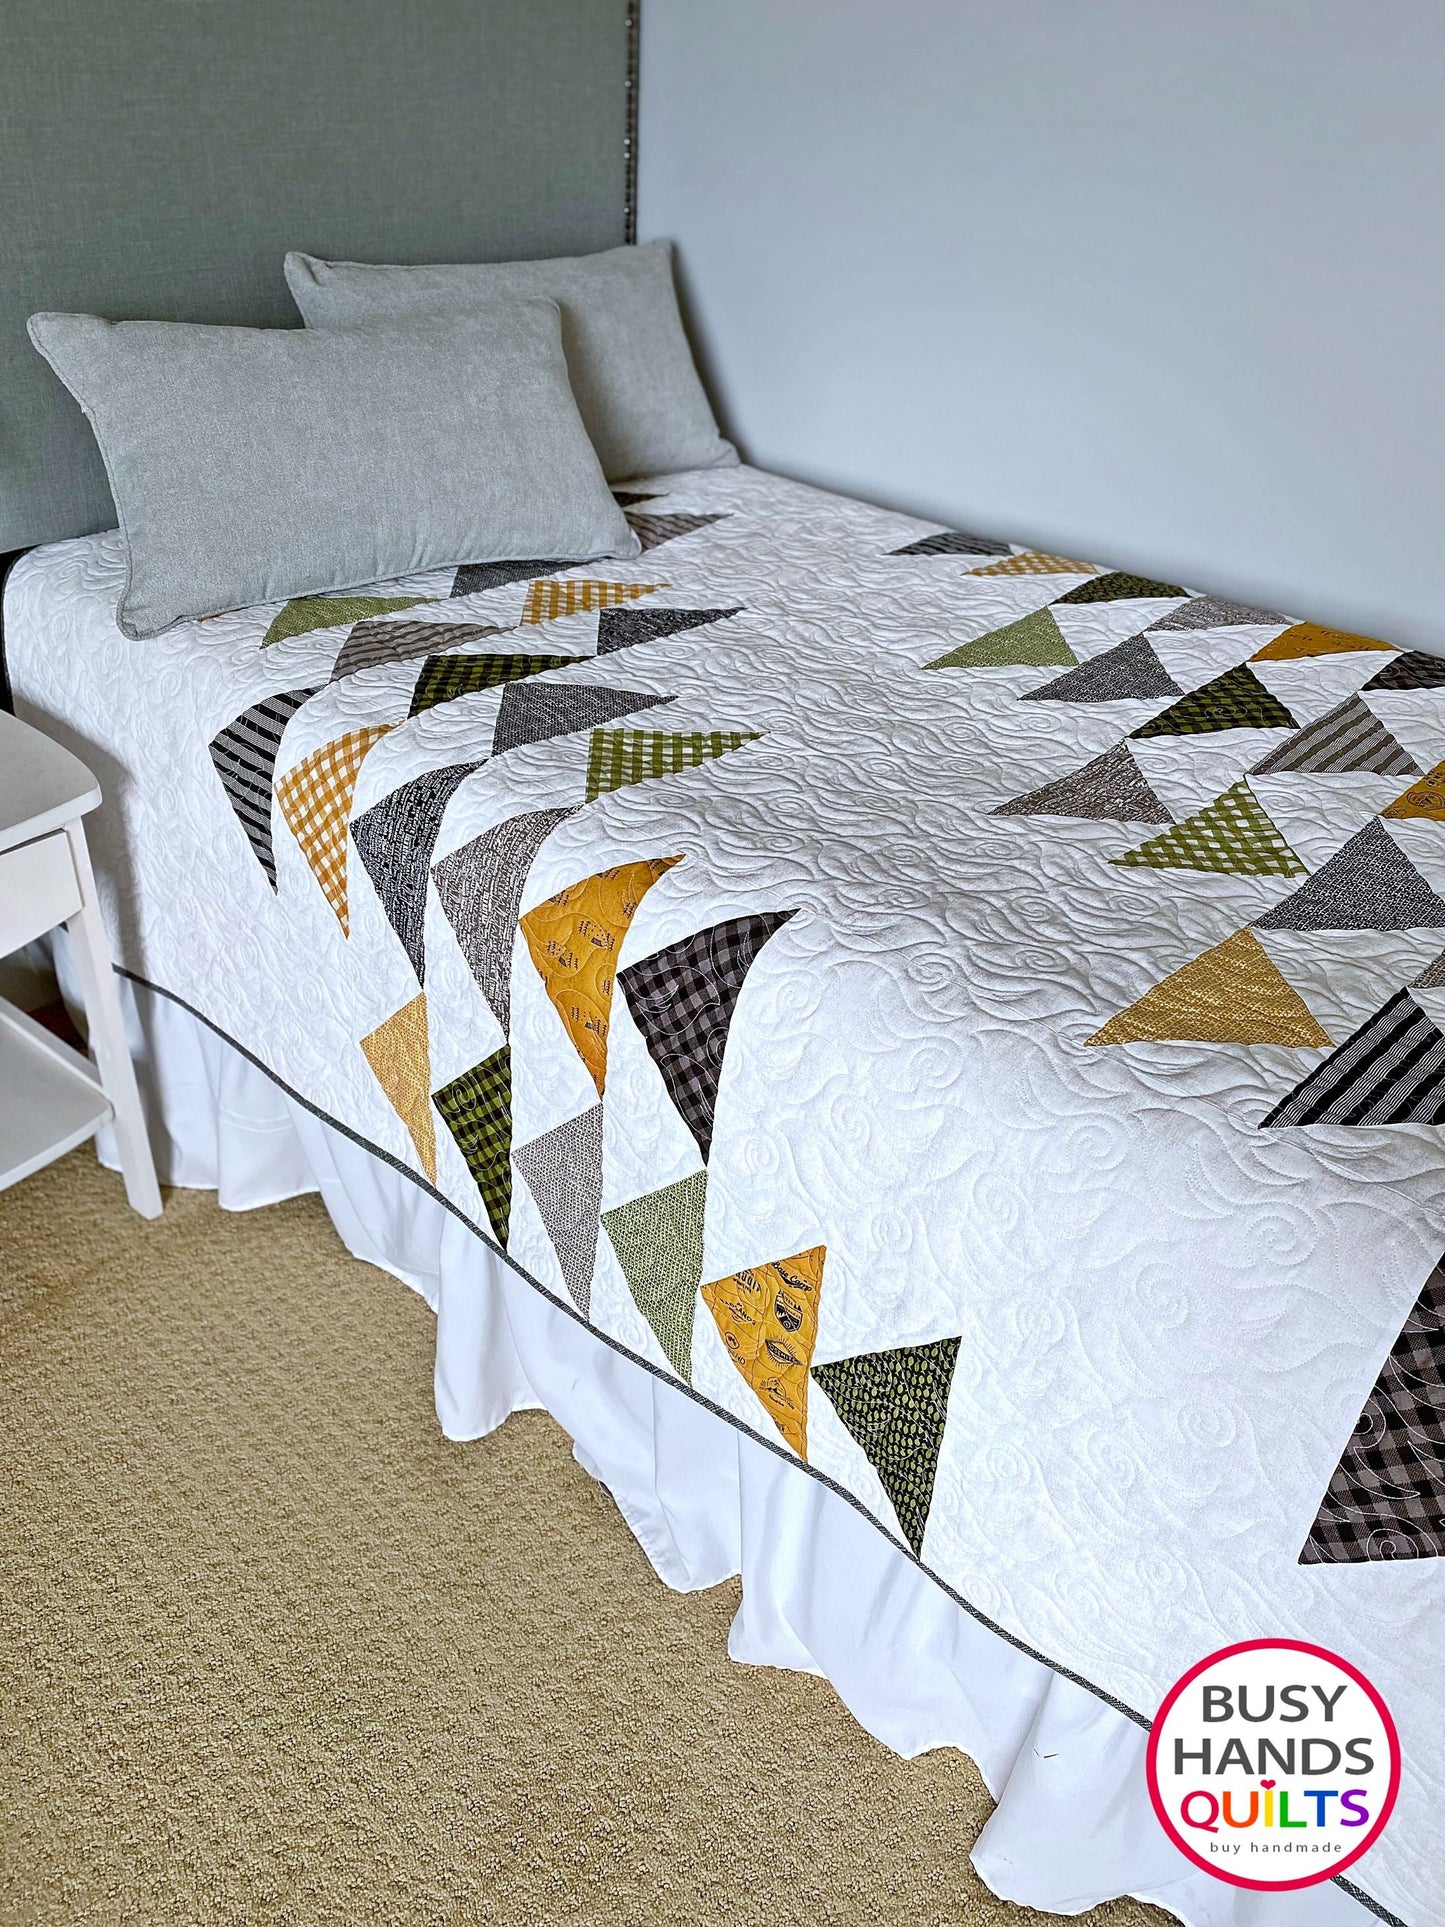 Custom Handmade Formation Throw Quilt in Timber - Ready to Ship Busy Hands Quilts $365